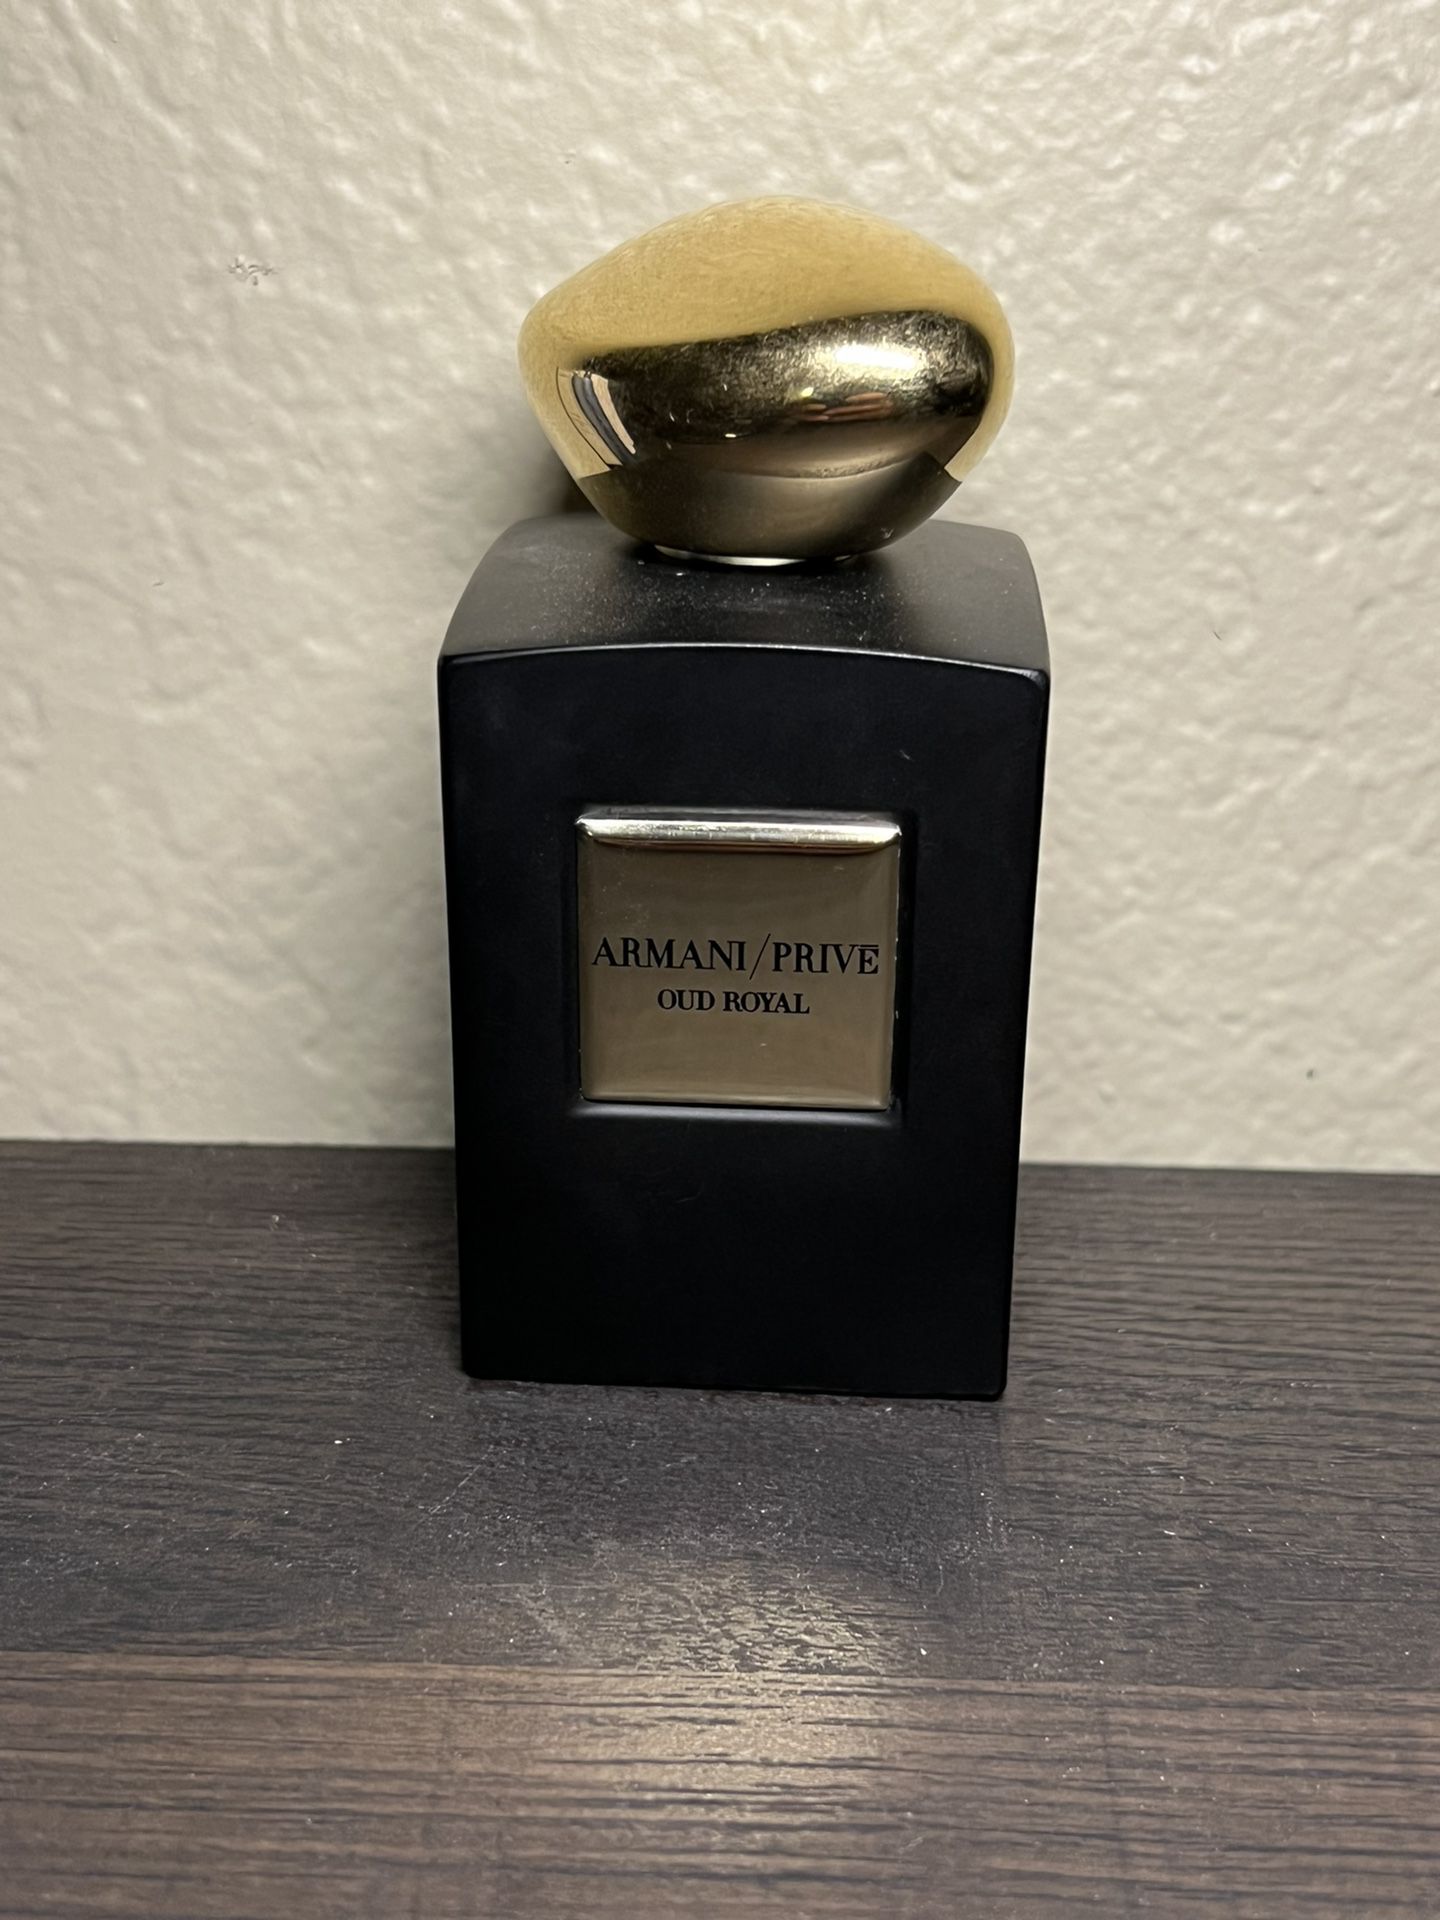 Armani Prive - Oud Royal 100ml for Sale in Fort Worth, TX - OfferUp